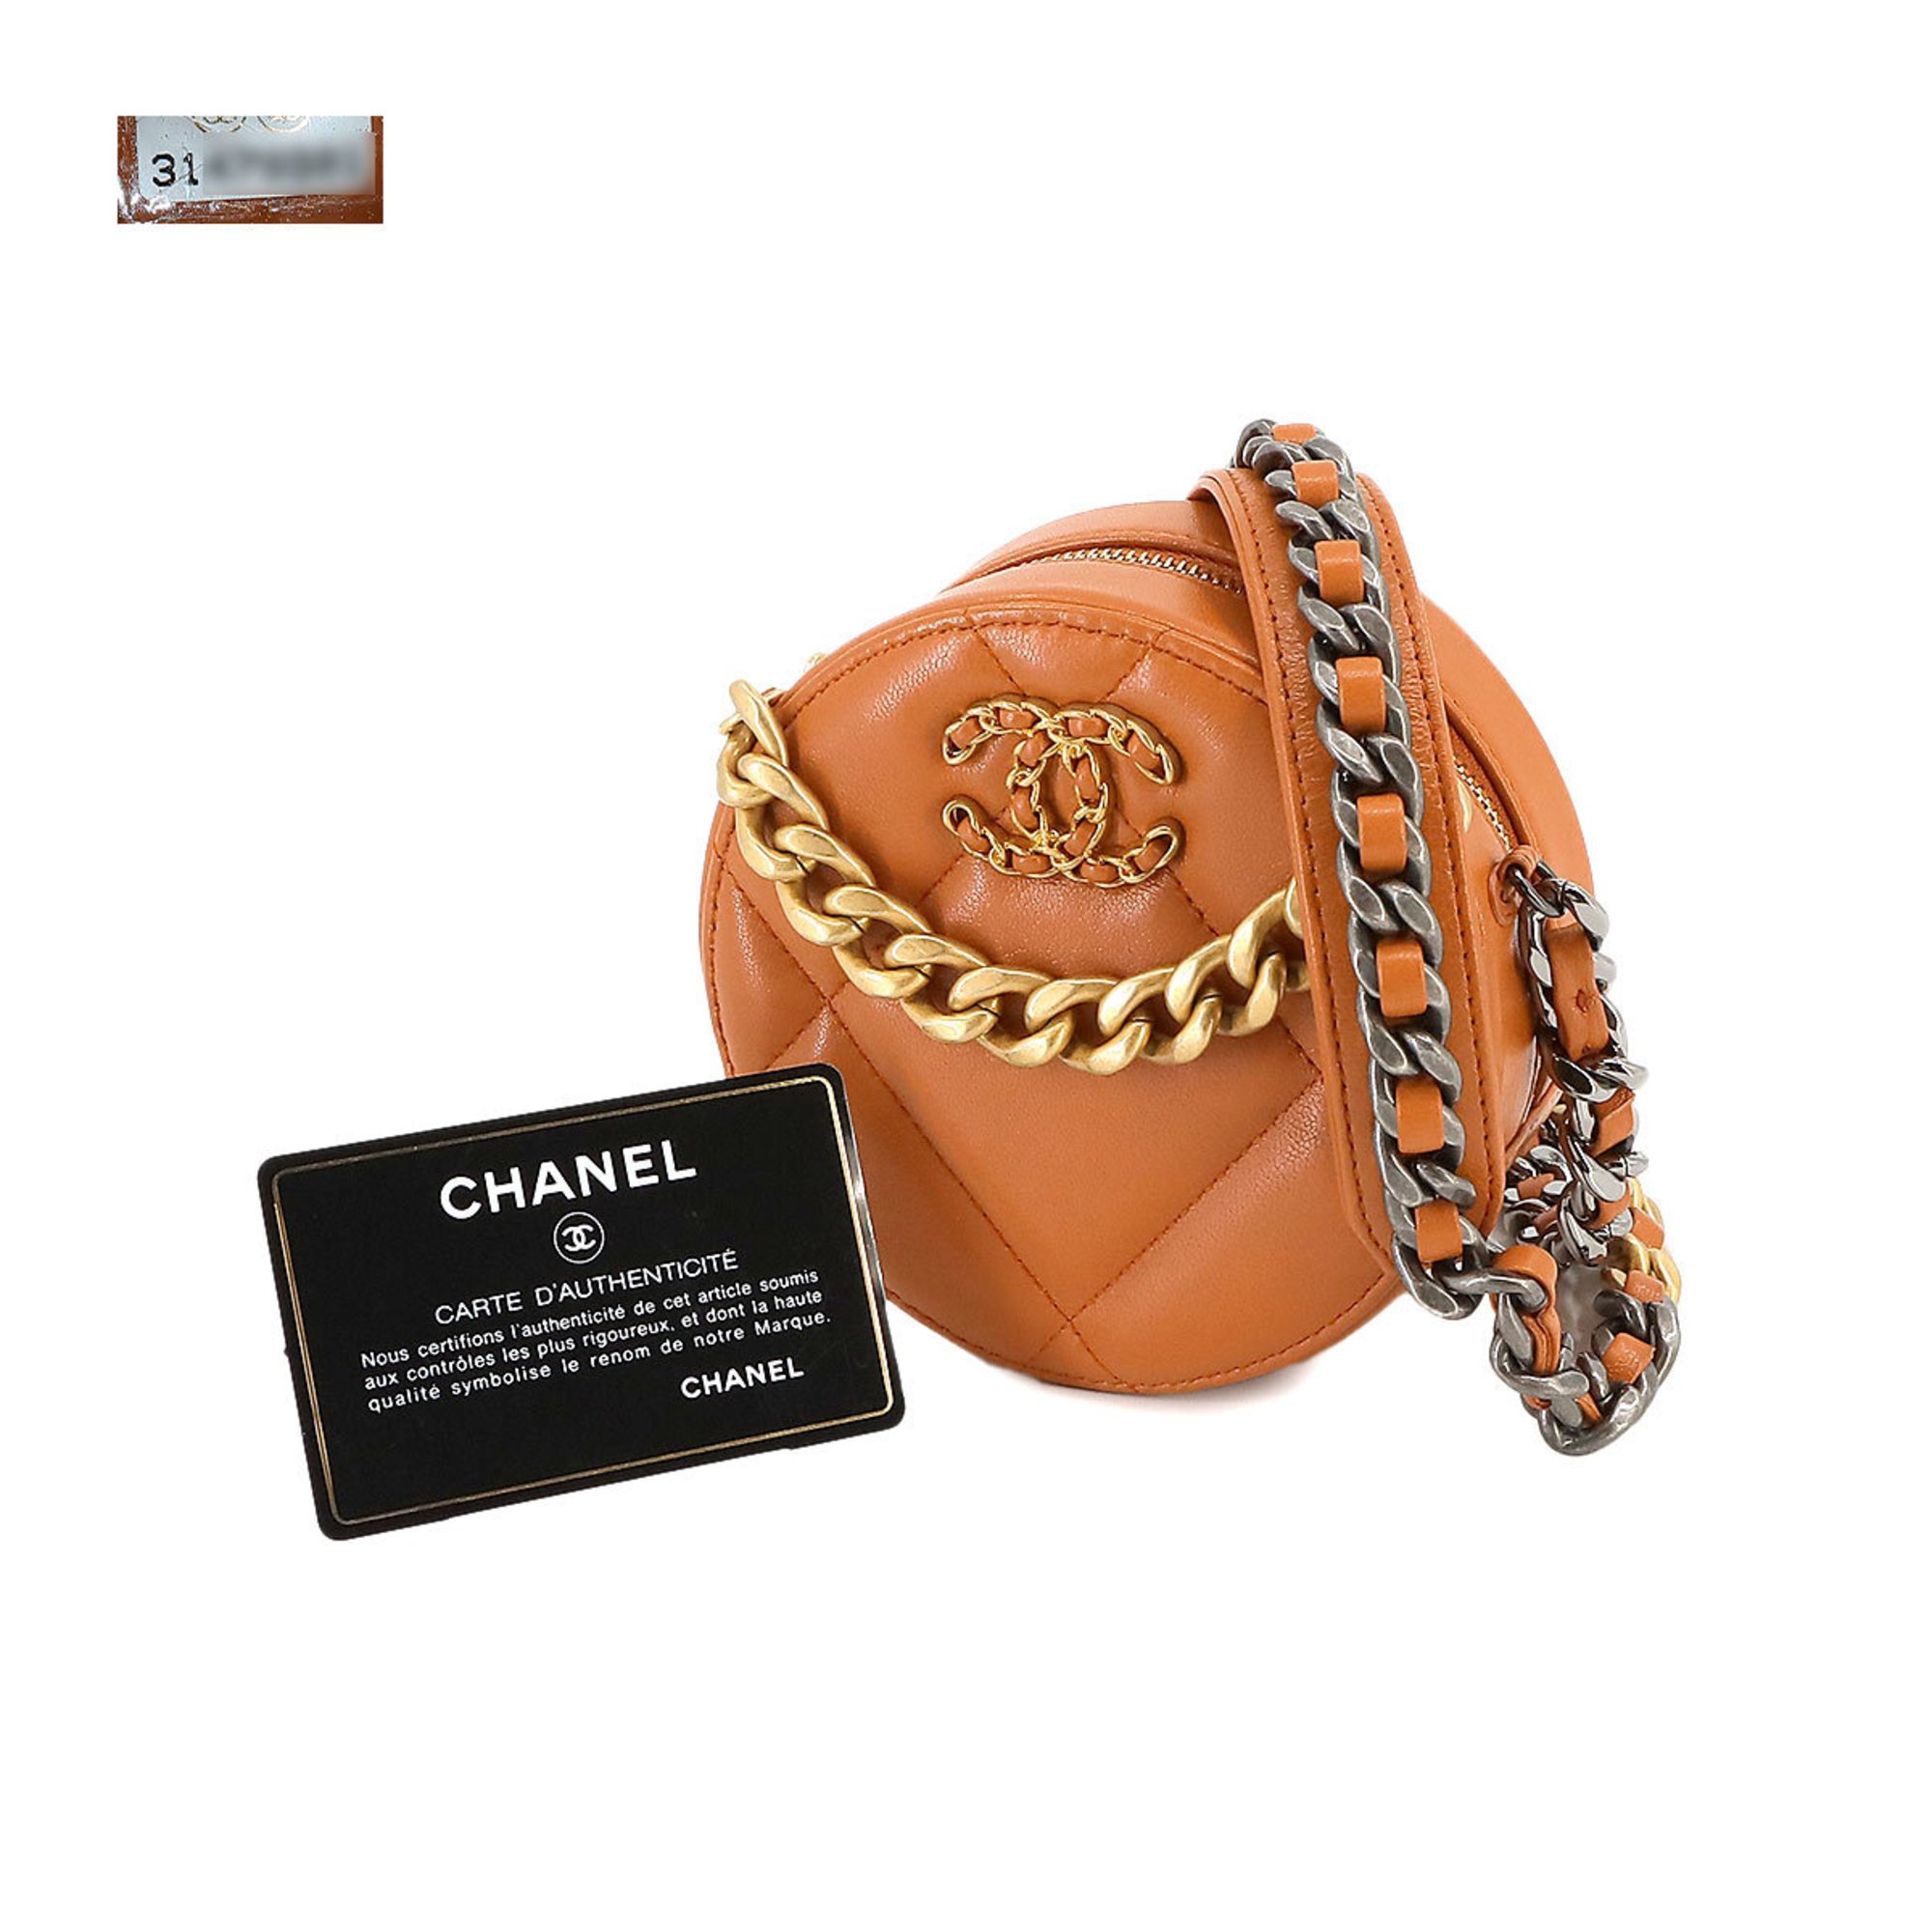 Chanel CHANEL 19 Round Clutch Chain Shoulder Bag Leather Brown AP0945